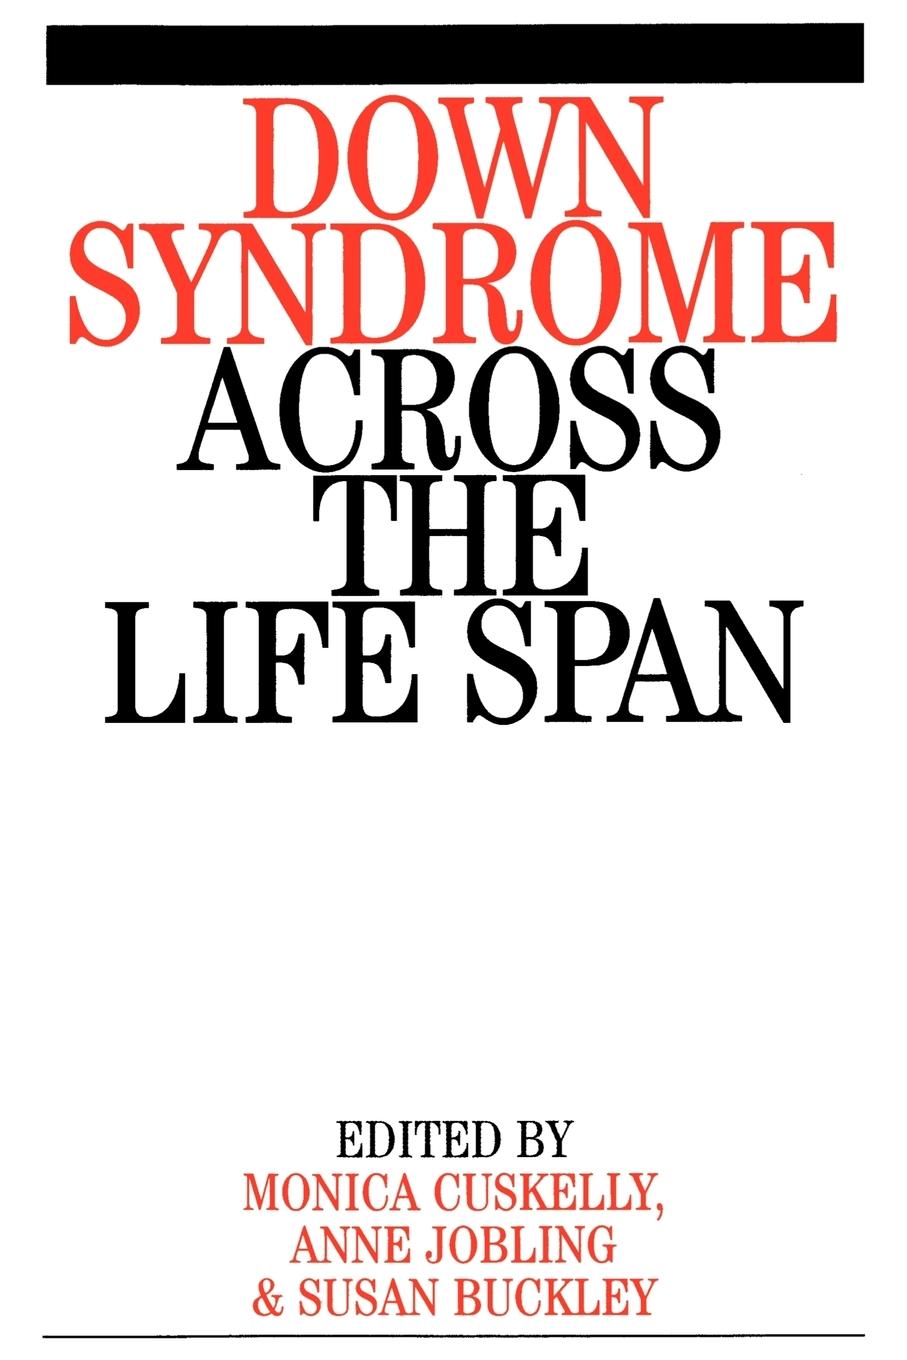 Down Syndrome Across the Life Span - Cuskelly Buckley Jobling